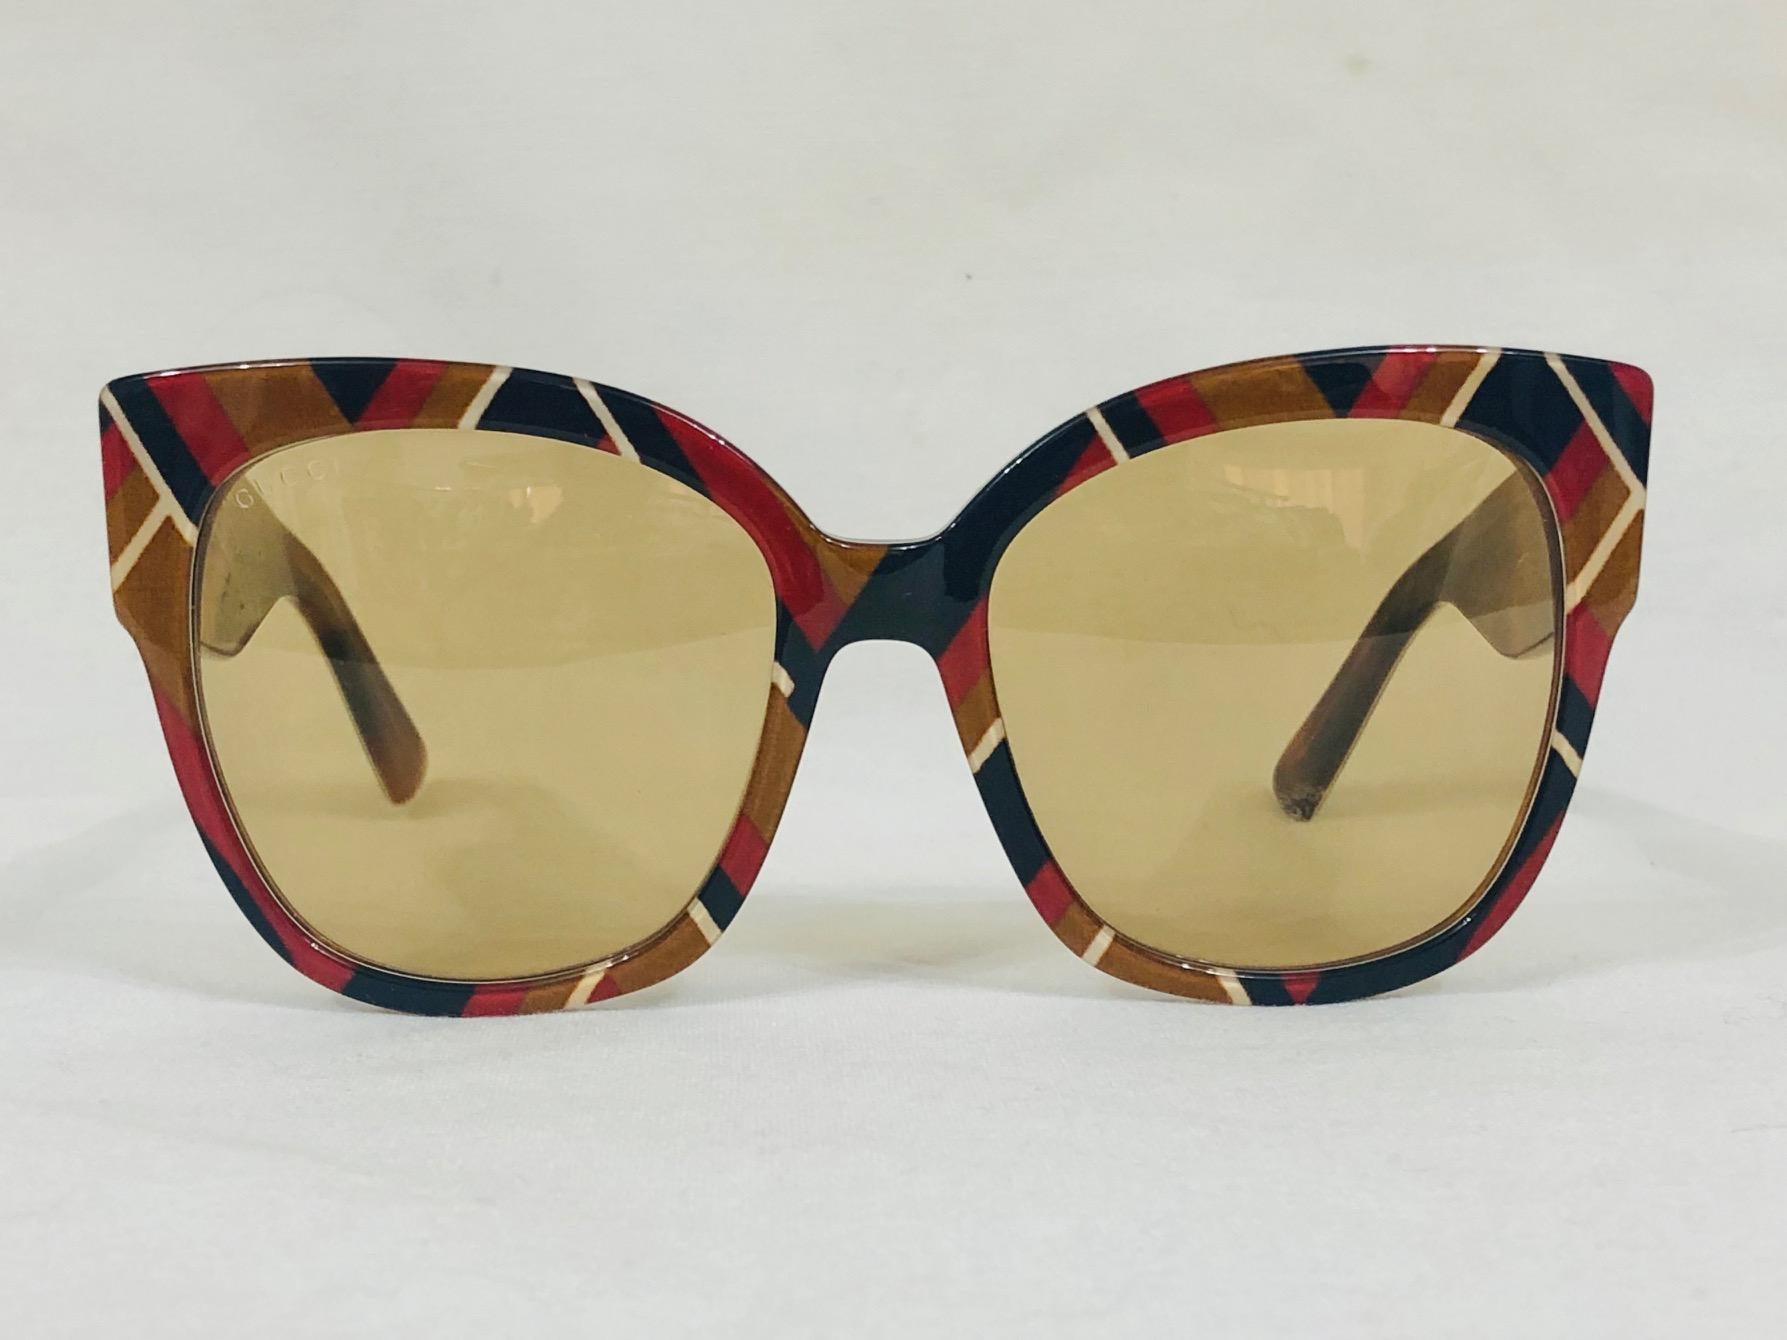 An instant classic, these new Gucci Sunglasses feature a square, cat eye and signature studs on the temples.  Light amber tint lenses and warm multi-color print frames complement any fall look.  Hard to find in new condition with hard case,